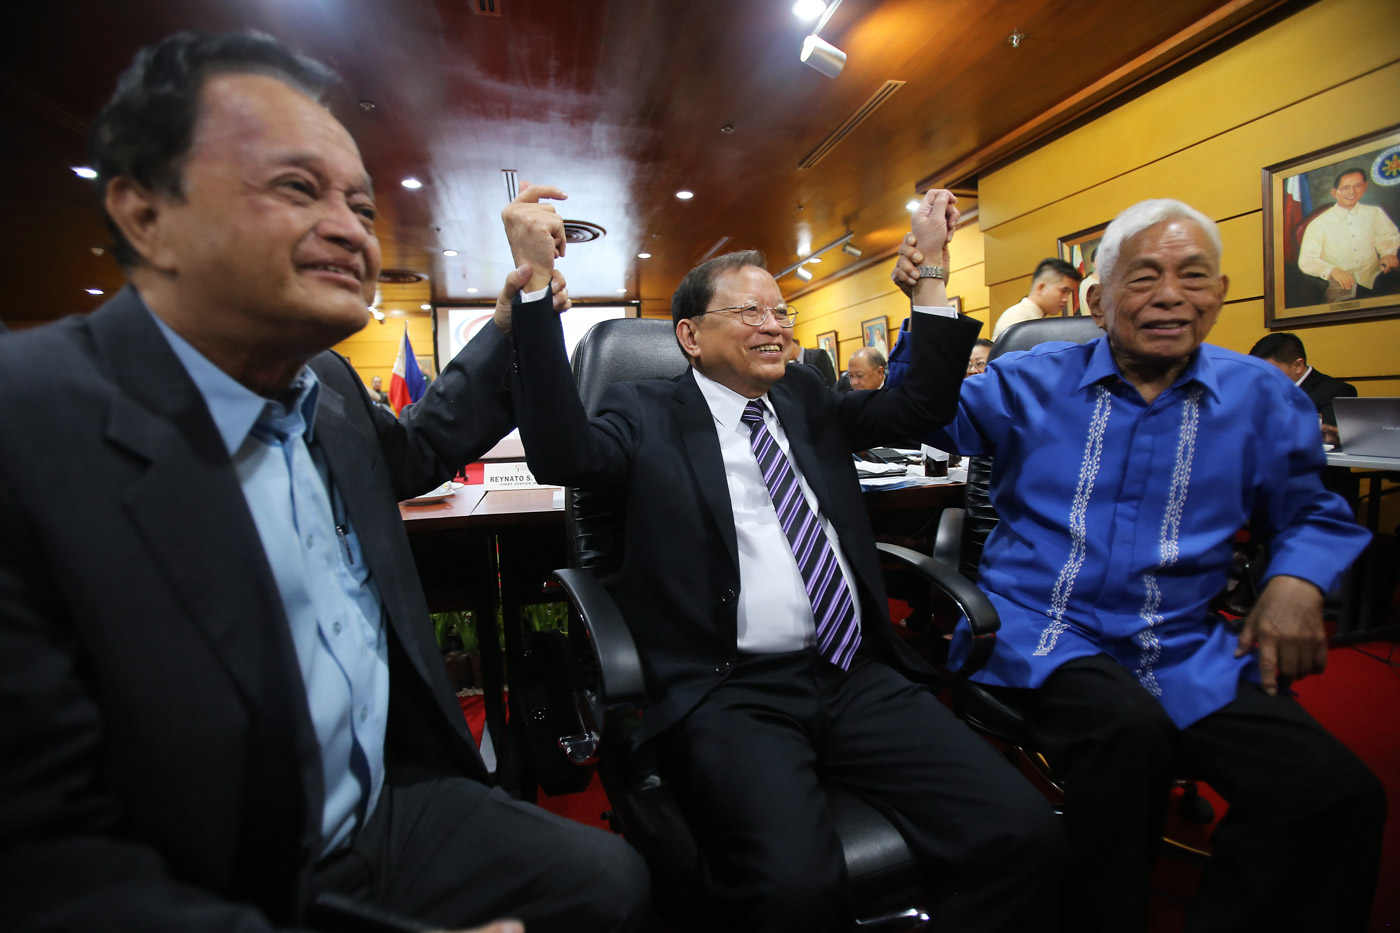 CULMINATION OF EFFORTS. Con-Com chairman Reynato Puno, flanked by members Antonio Nachura and Aquilino Pimentel Jr, celebrate after voting to approve a draft federal constitution. Photo by Ben Nabong/Rappler 